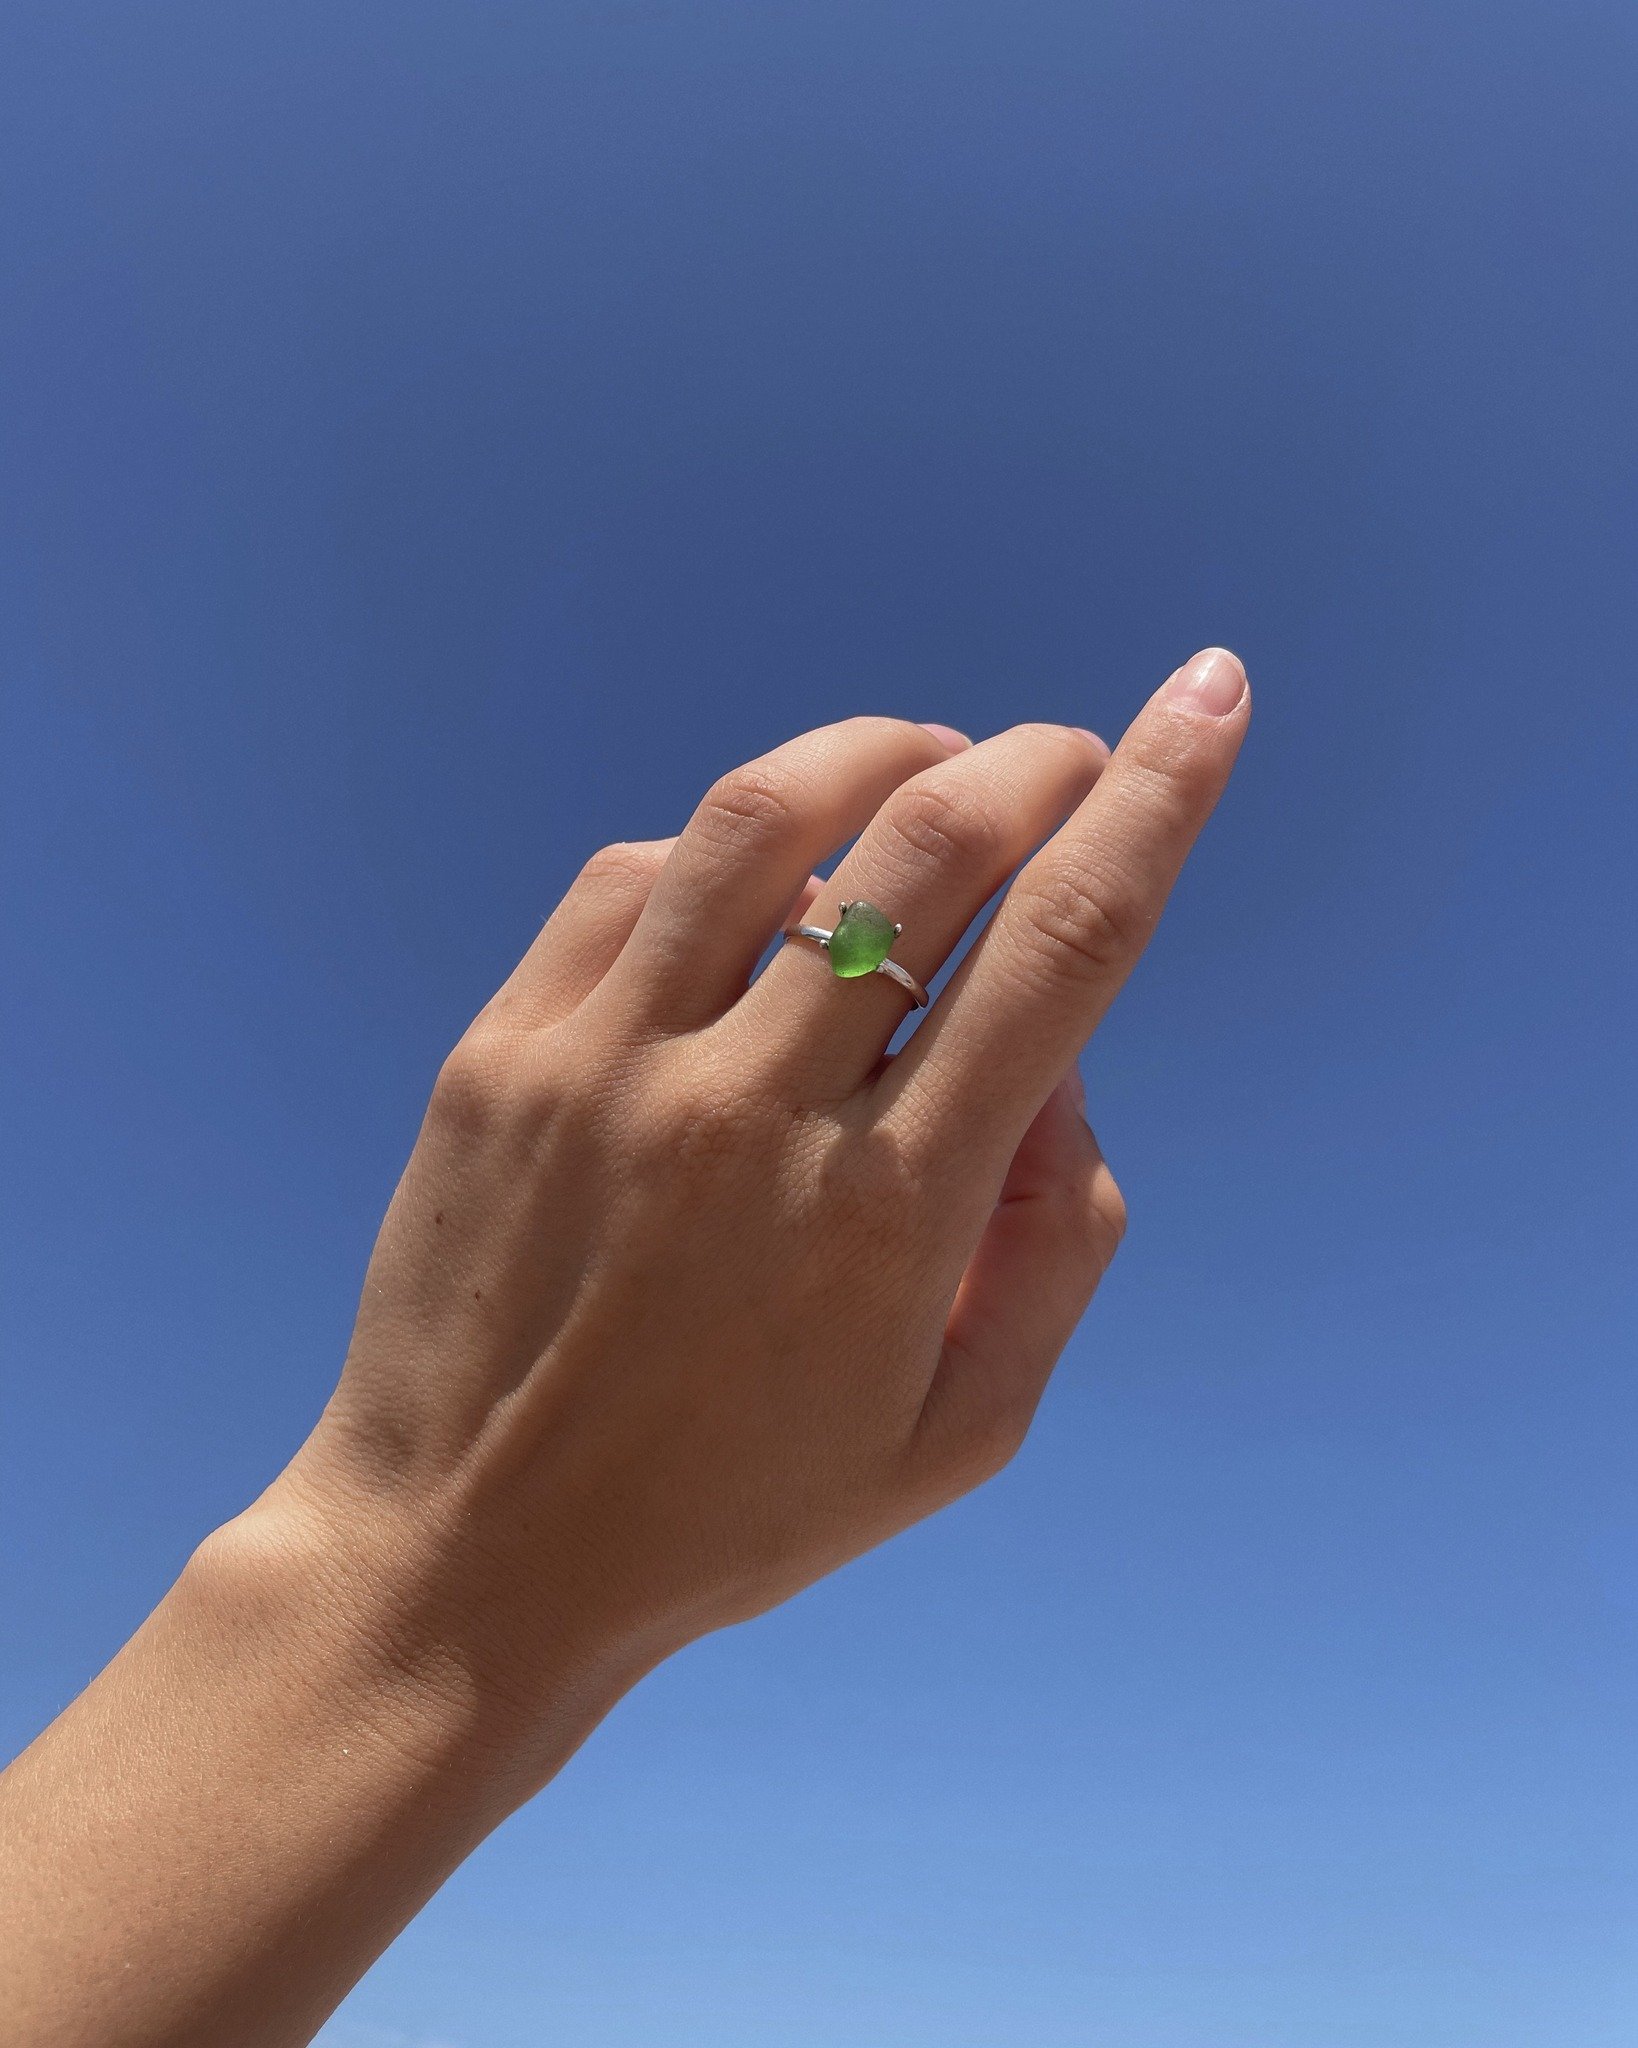 We all know how stunning sea glass is, and now you can wear a piece of it with you everywhere you go. Check out this absolutely gorgeous sea glass ring by @gaya.seajewels 💚🌊
.
.
.
#cocoabeach #beachlife #floridalife #sunsandsea #beachshop #cocoabea